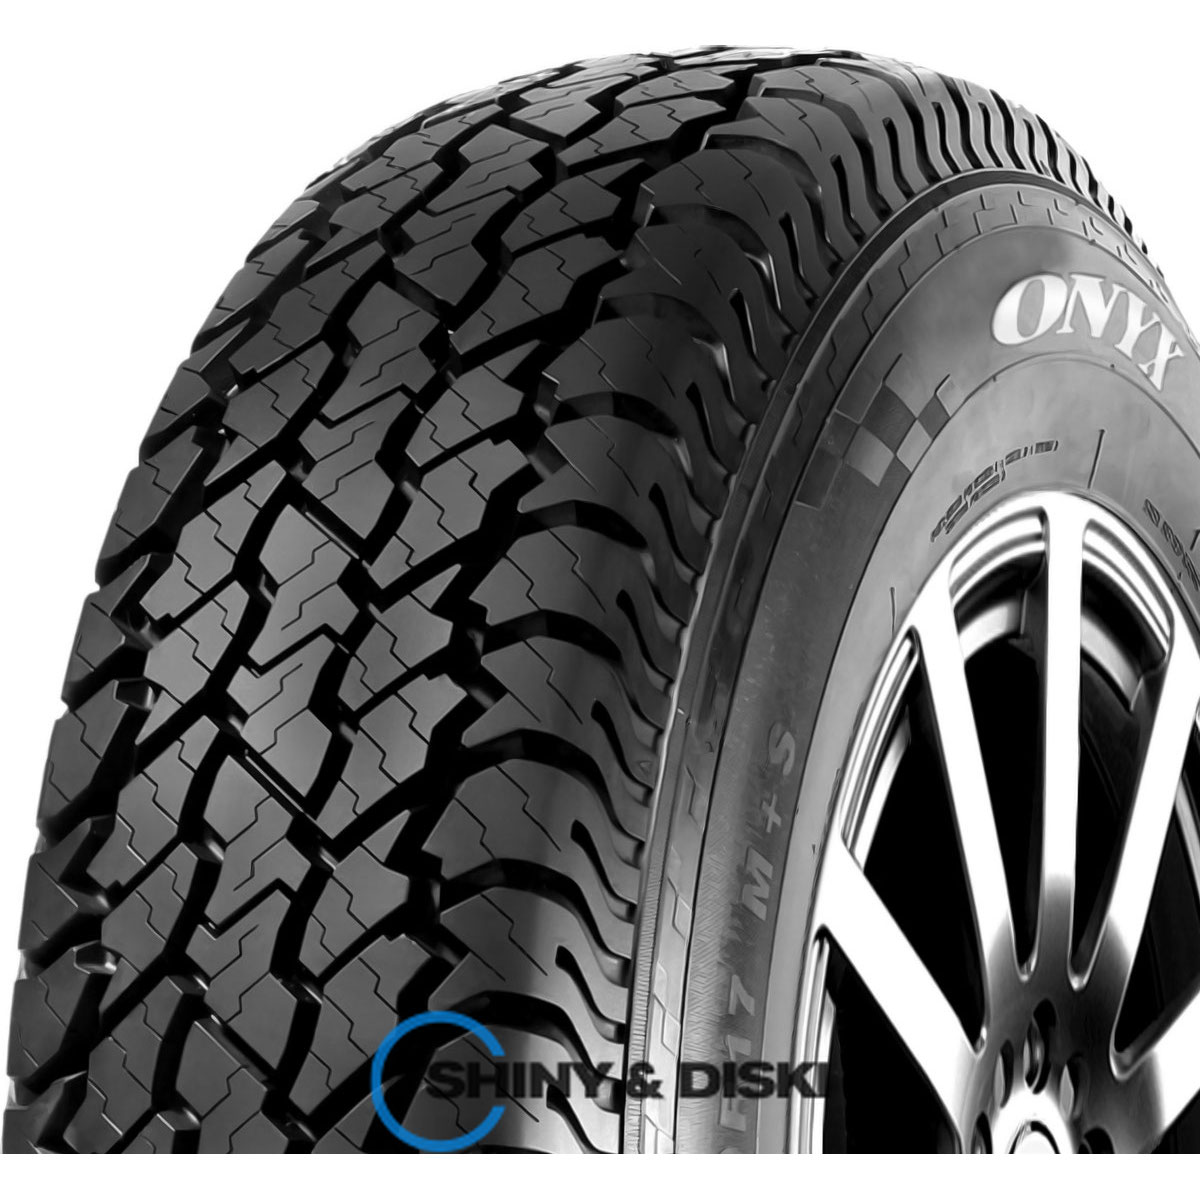 покрышки onyx ny-at187 235/70 r16 106t